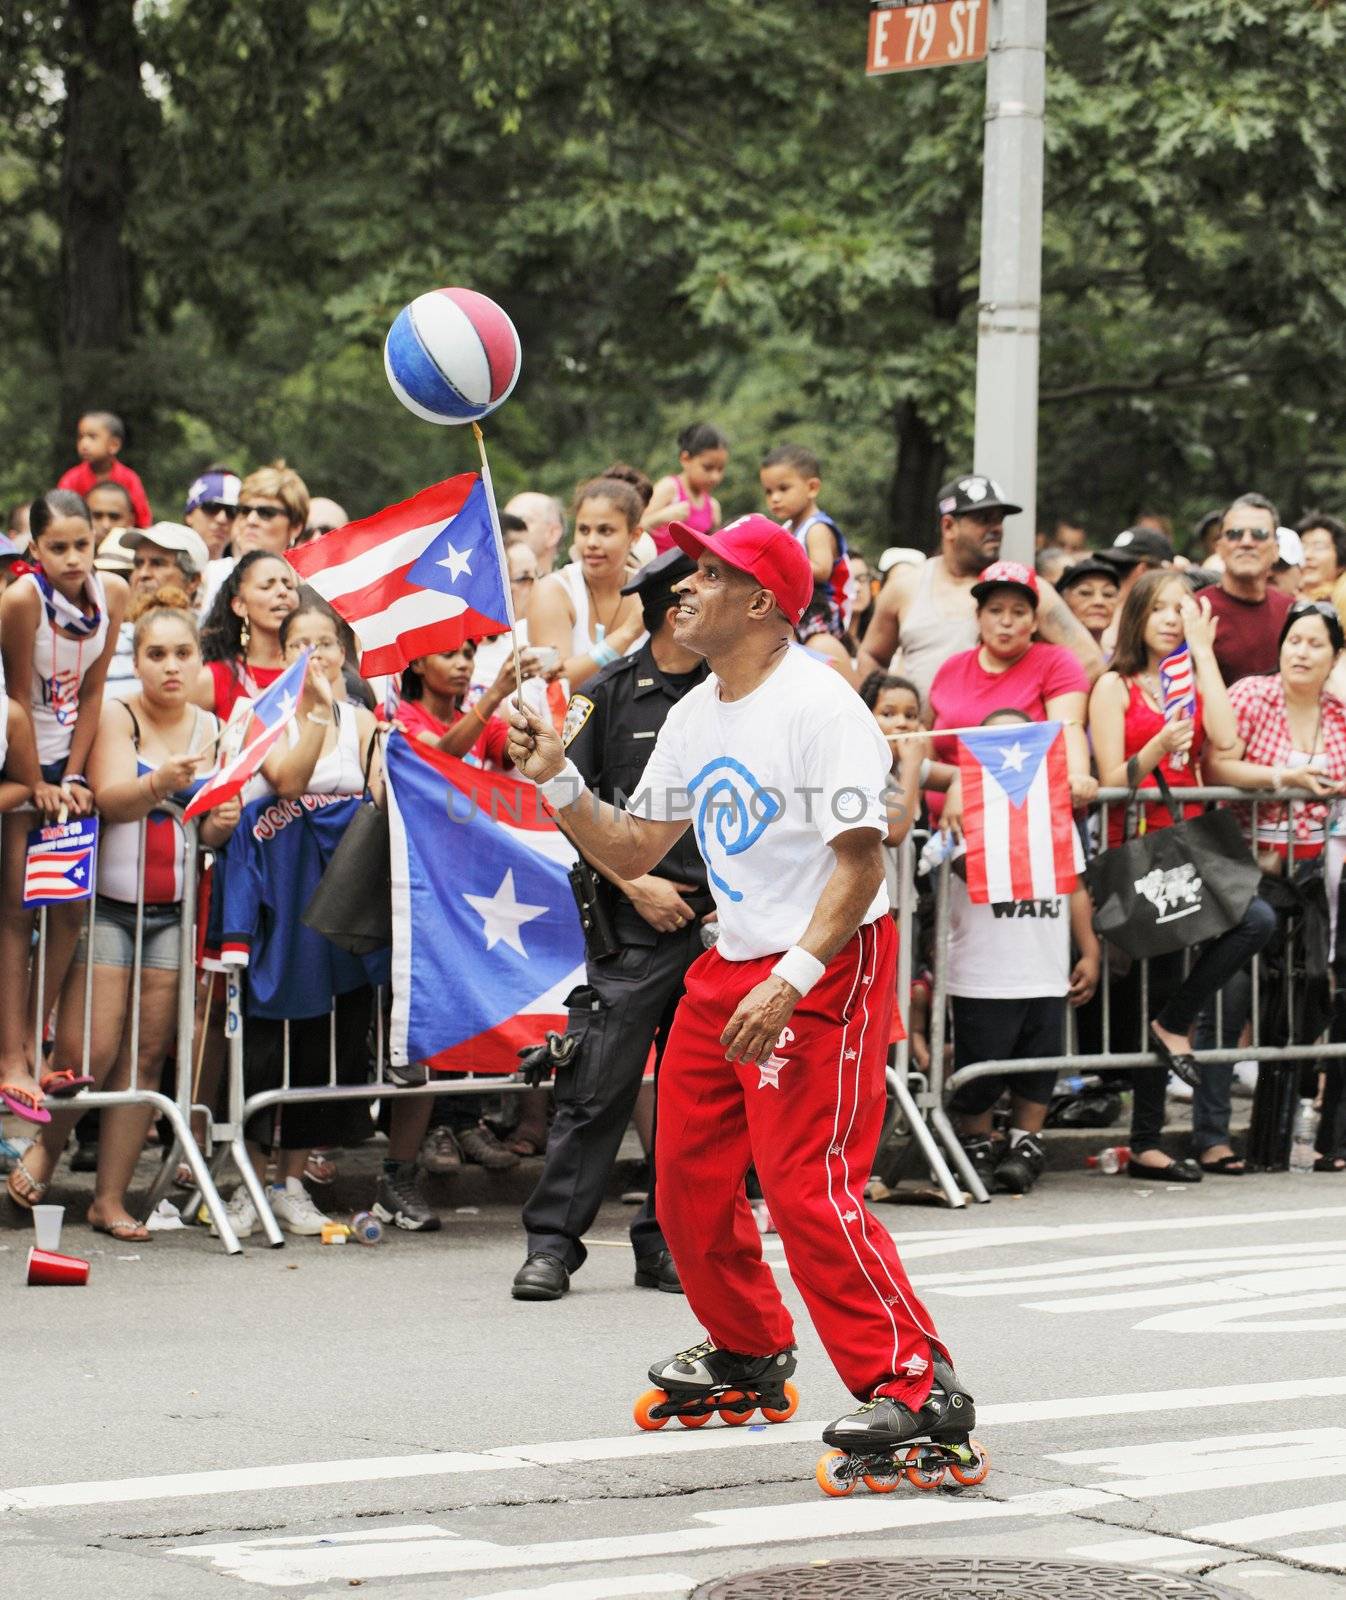 NEW YORK CITY, USA - JUNE 10: The annual Puerto Rican Day Parade in NYC honoring the inhabitants of Puerto Rico and all people of Puerto Rican birth or heritage. June 10, 2012 in New York City, USA 